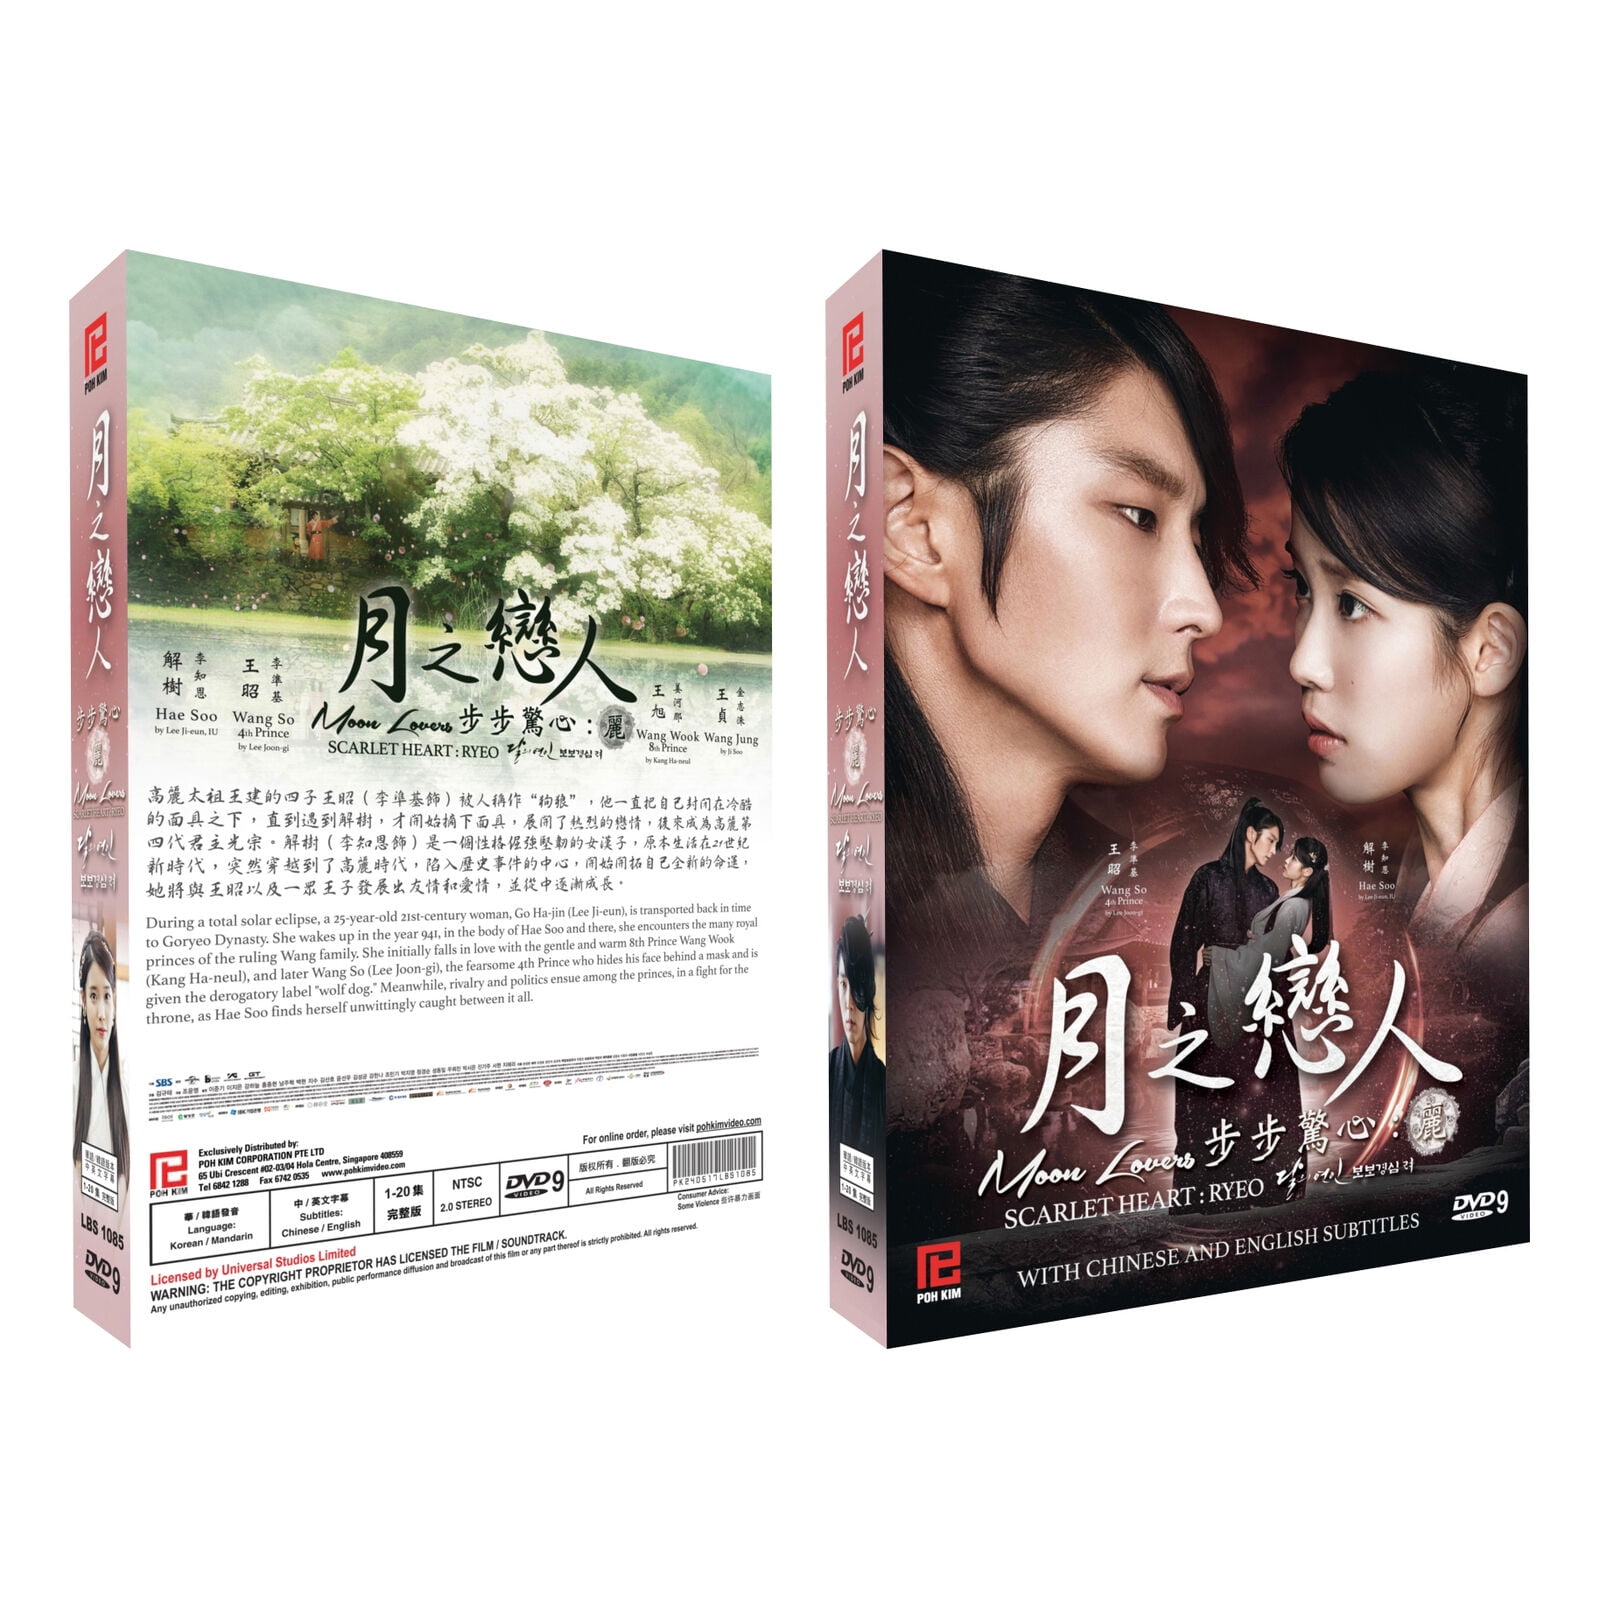 watch scarlet heart ryeo eng sub ep 12